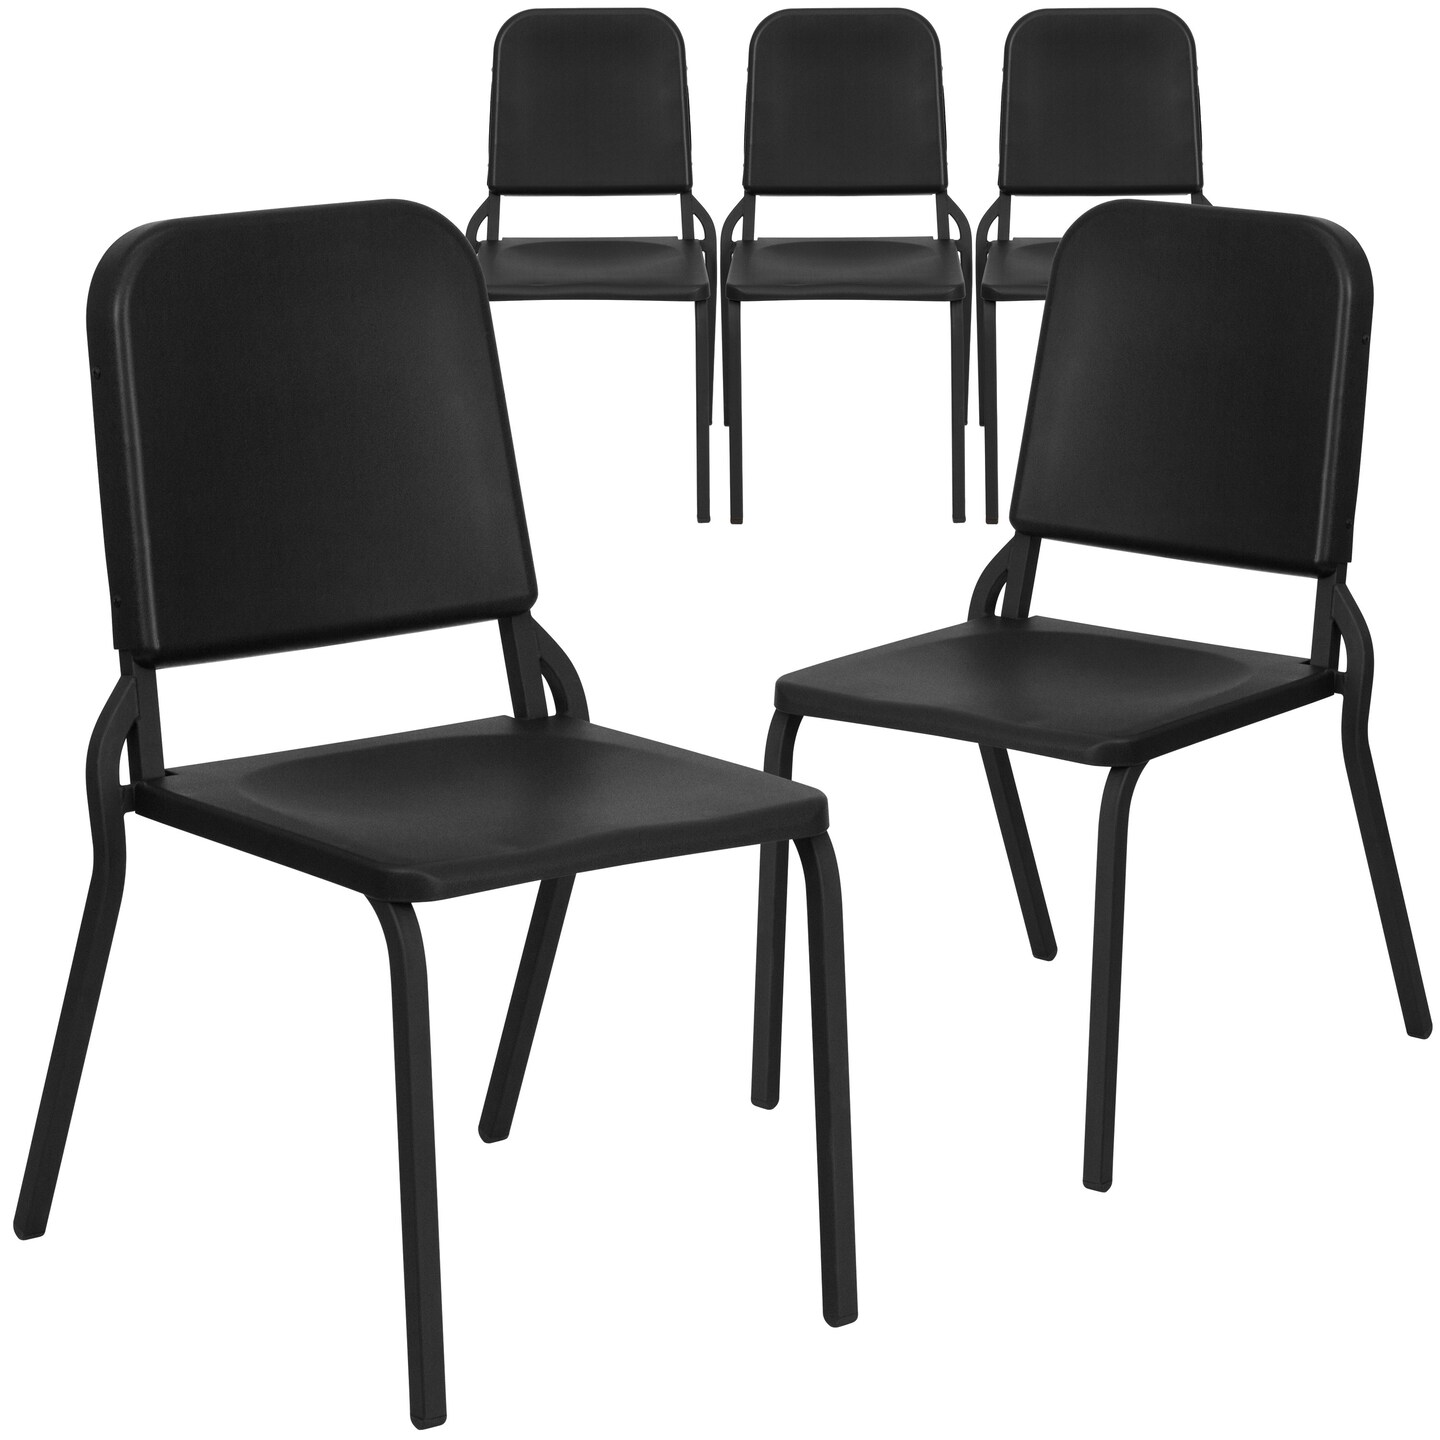 Emma and Oliver 5 Pack High Density Stackable Melody Band/Music Chair